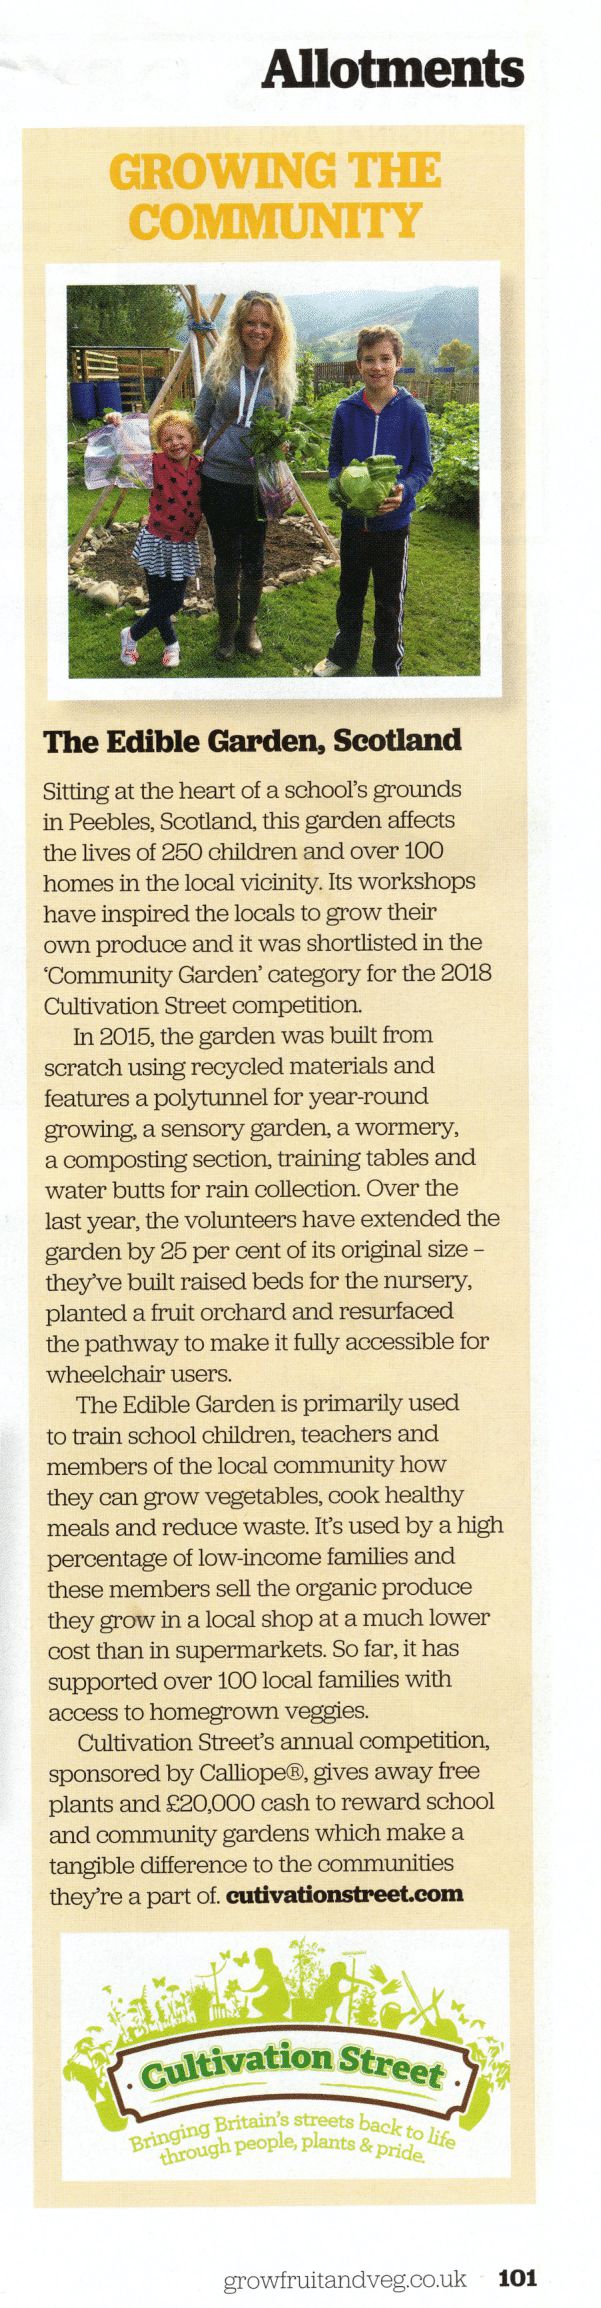 Press Clipping: Growing the community feature: the edible garden